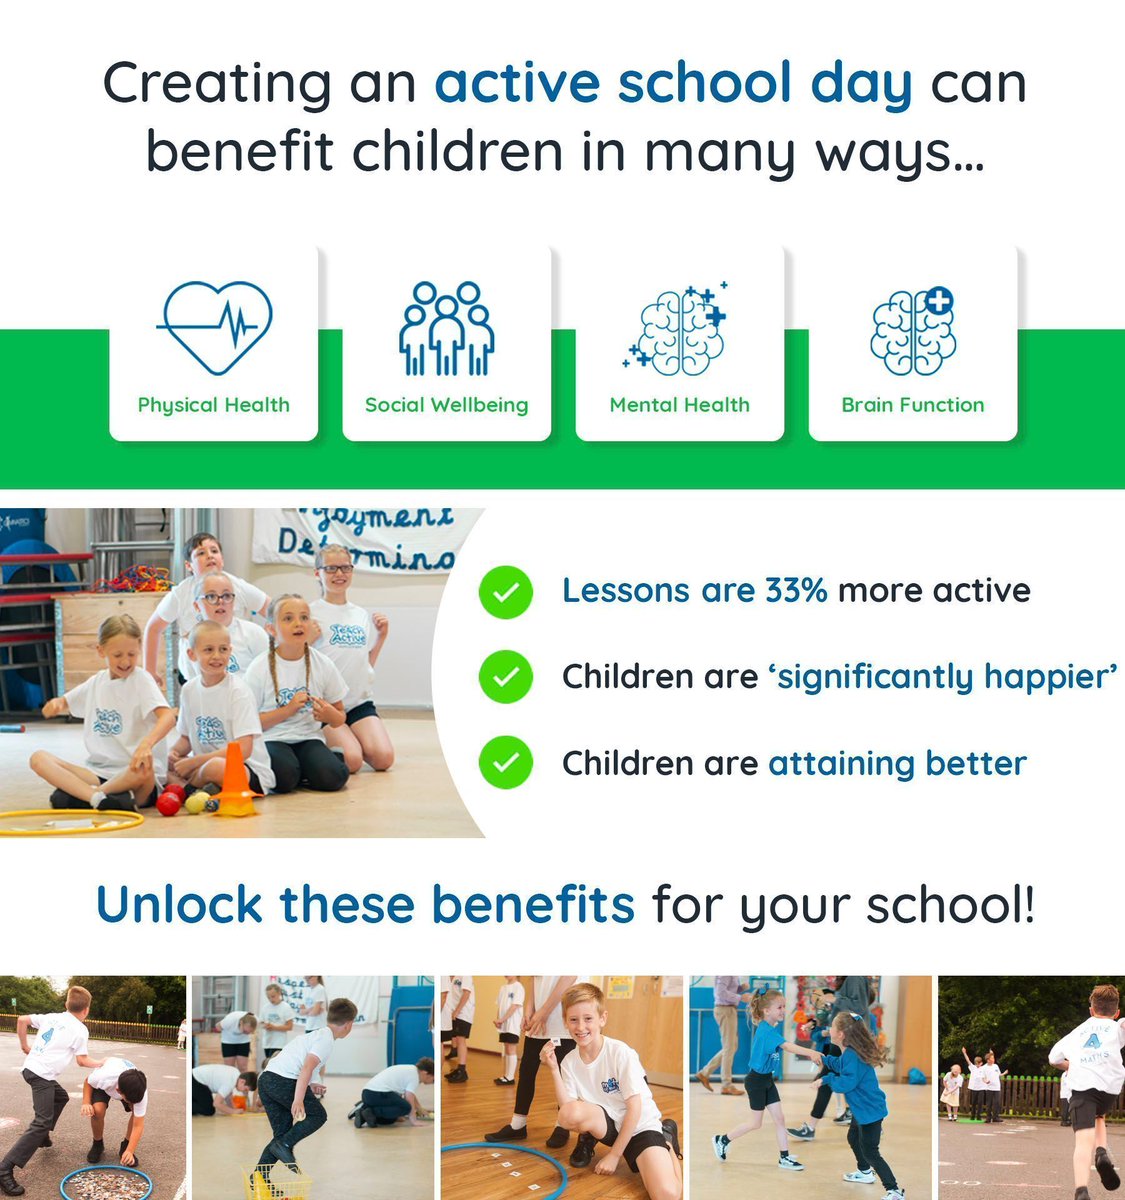 Discover how your school can benefit for an active school day! 🏃‍♂️ 🔗 buff.ly/49xRjUn #ActiveLessons #PrimarySchools